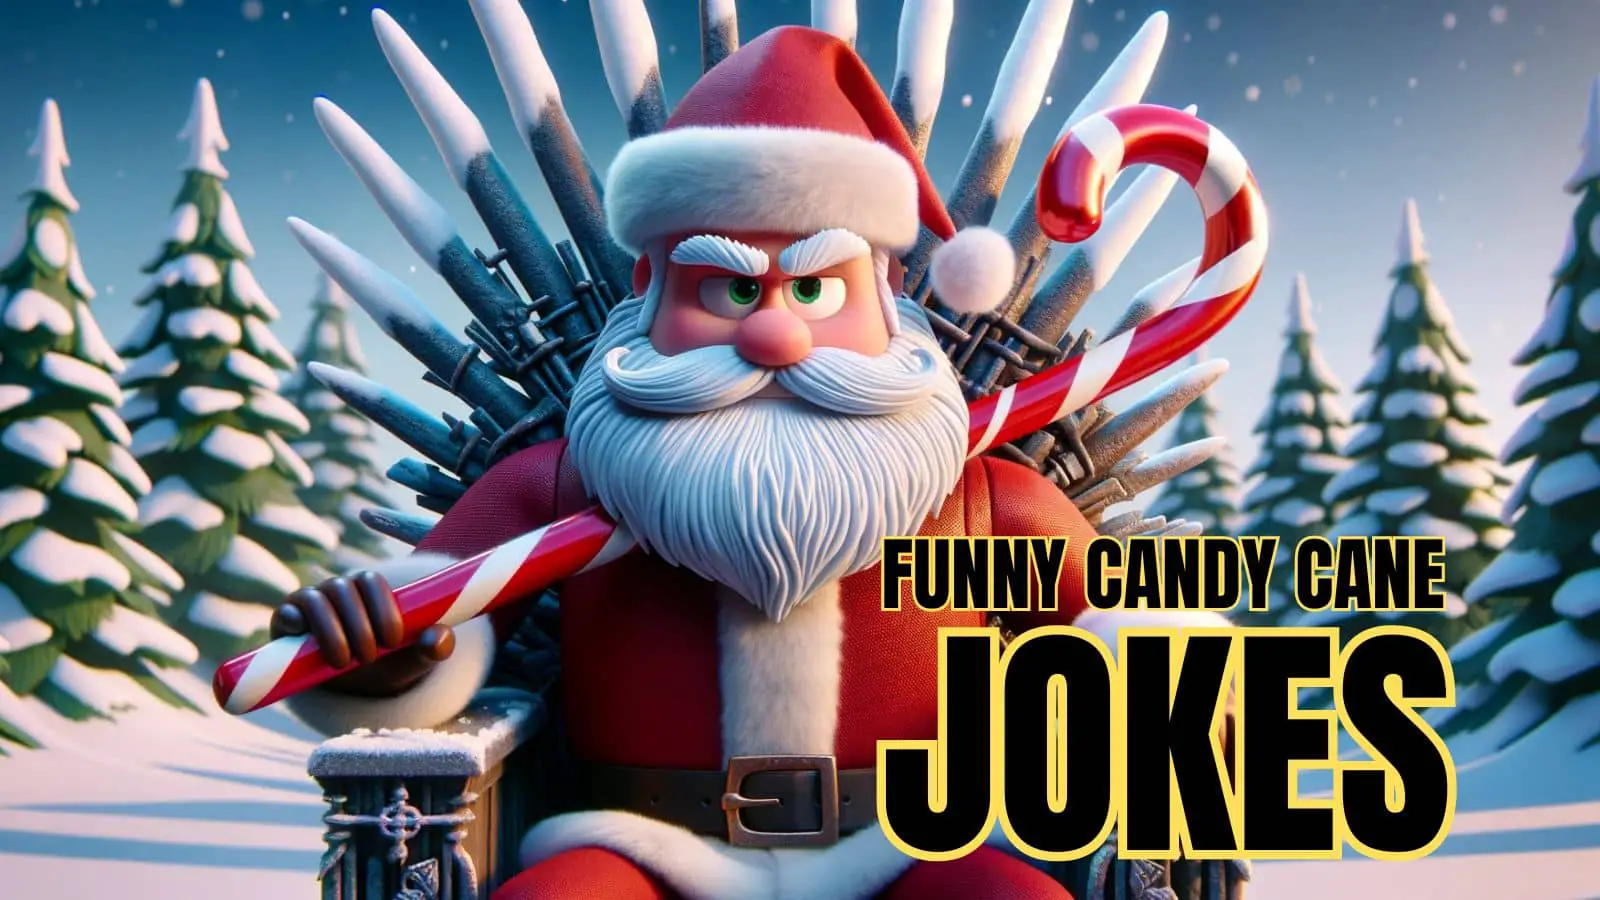 Funny Candy Cane Jokes on Christmas